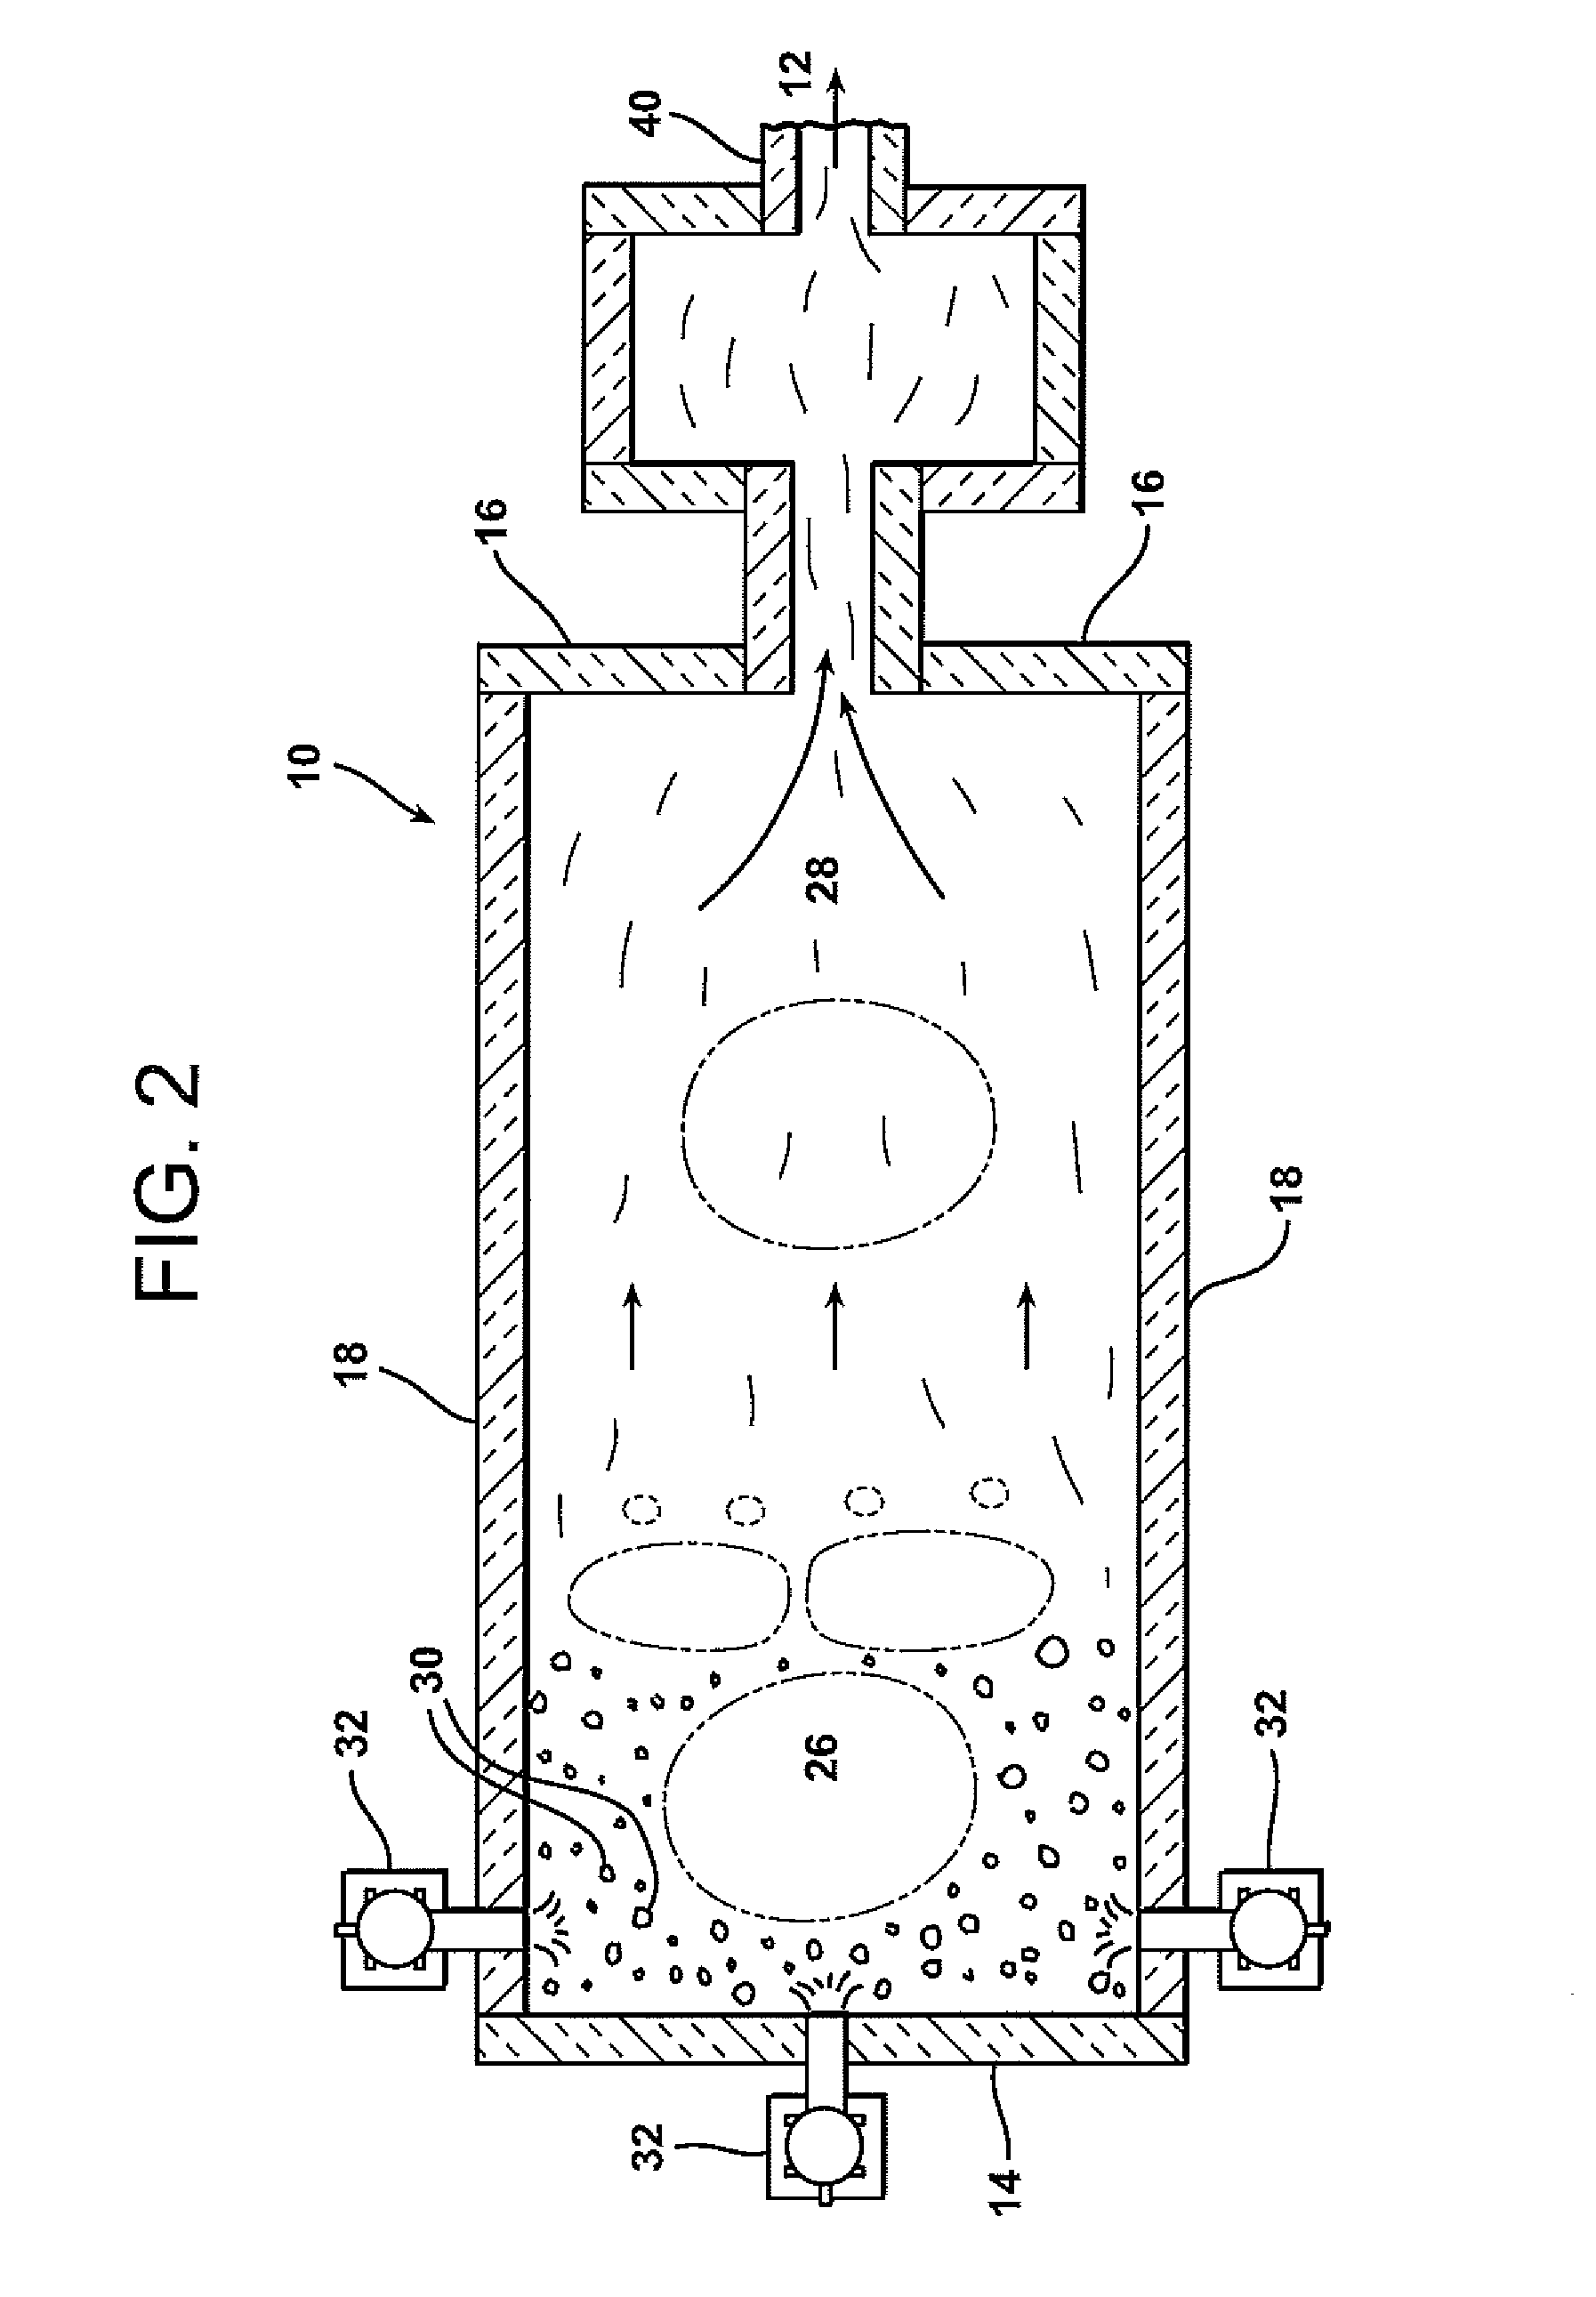 Method of manufacturing high strength glass fibers in a direct melt operation and products formed there from